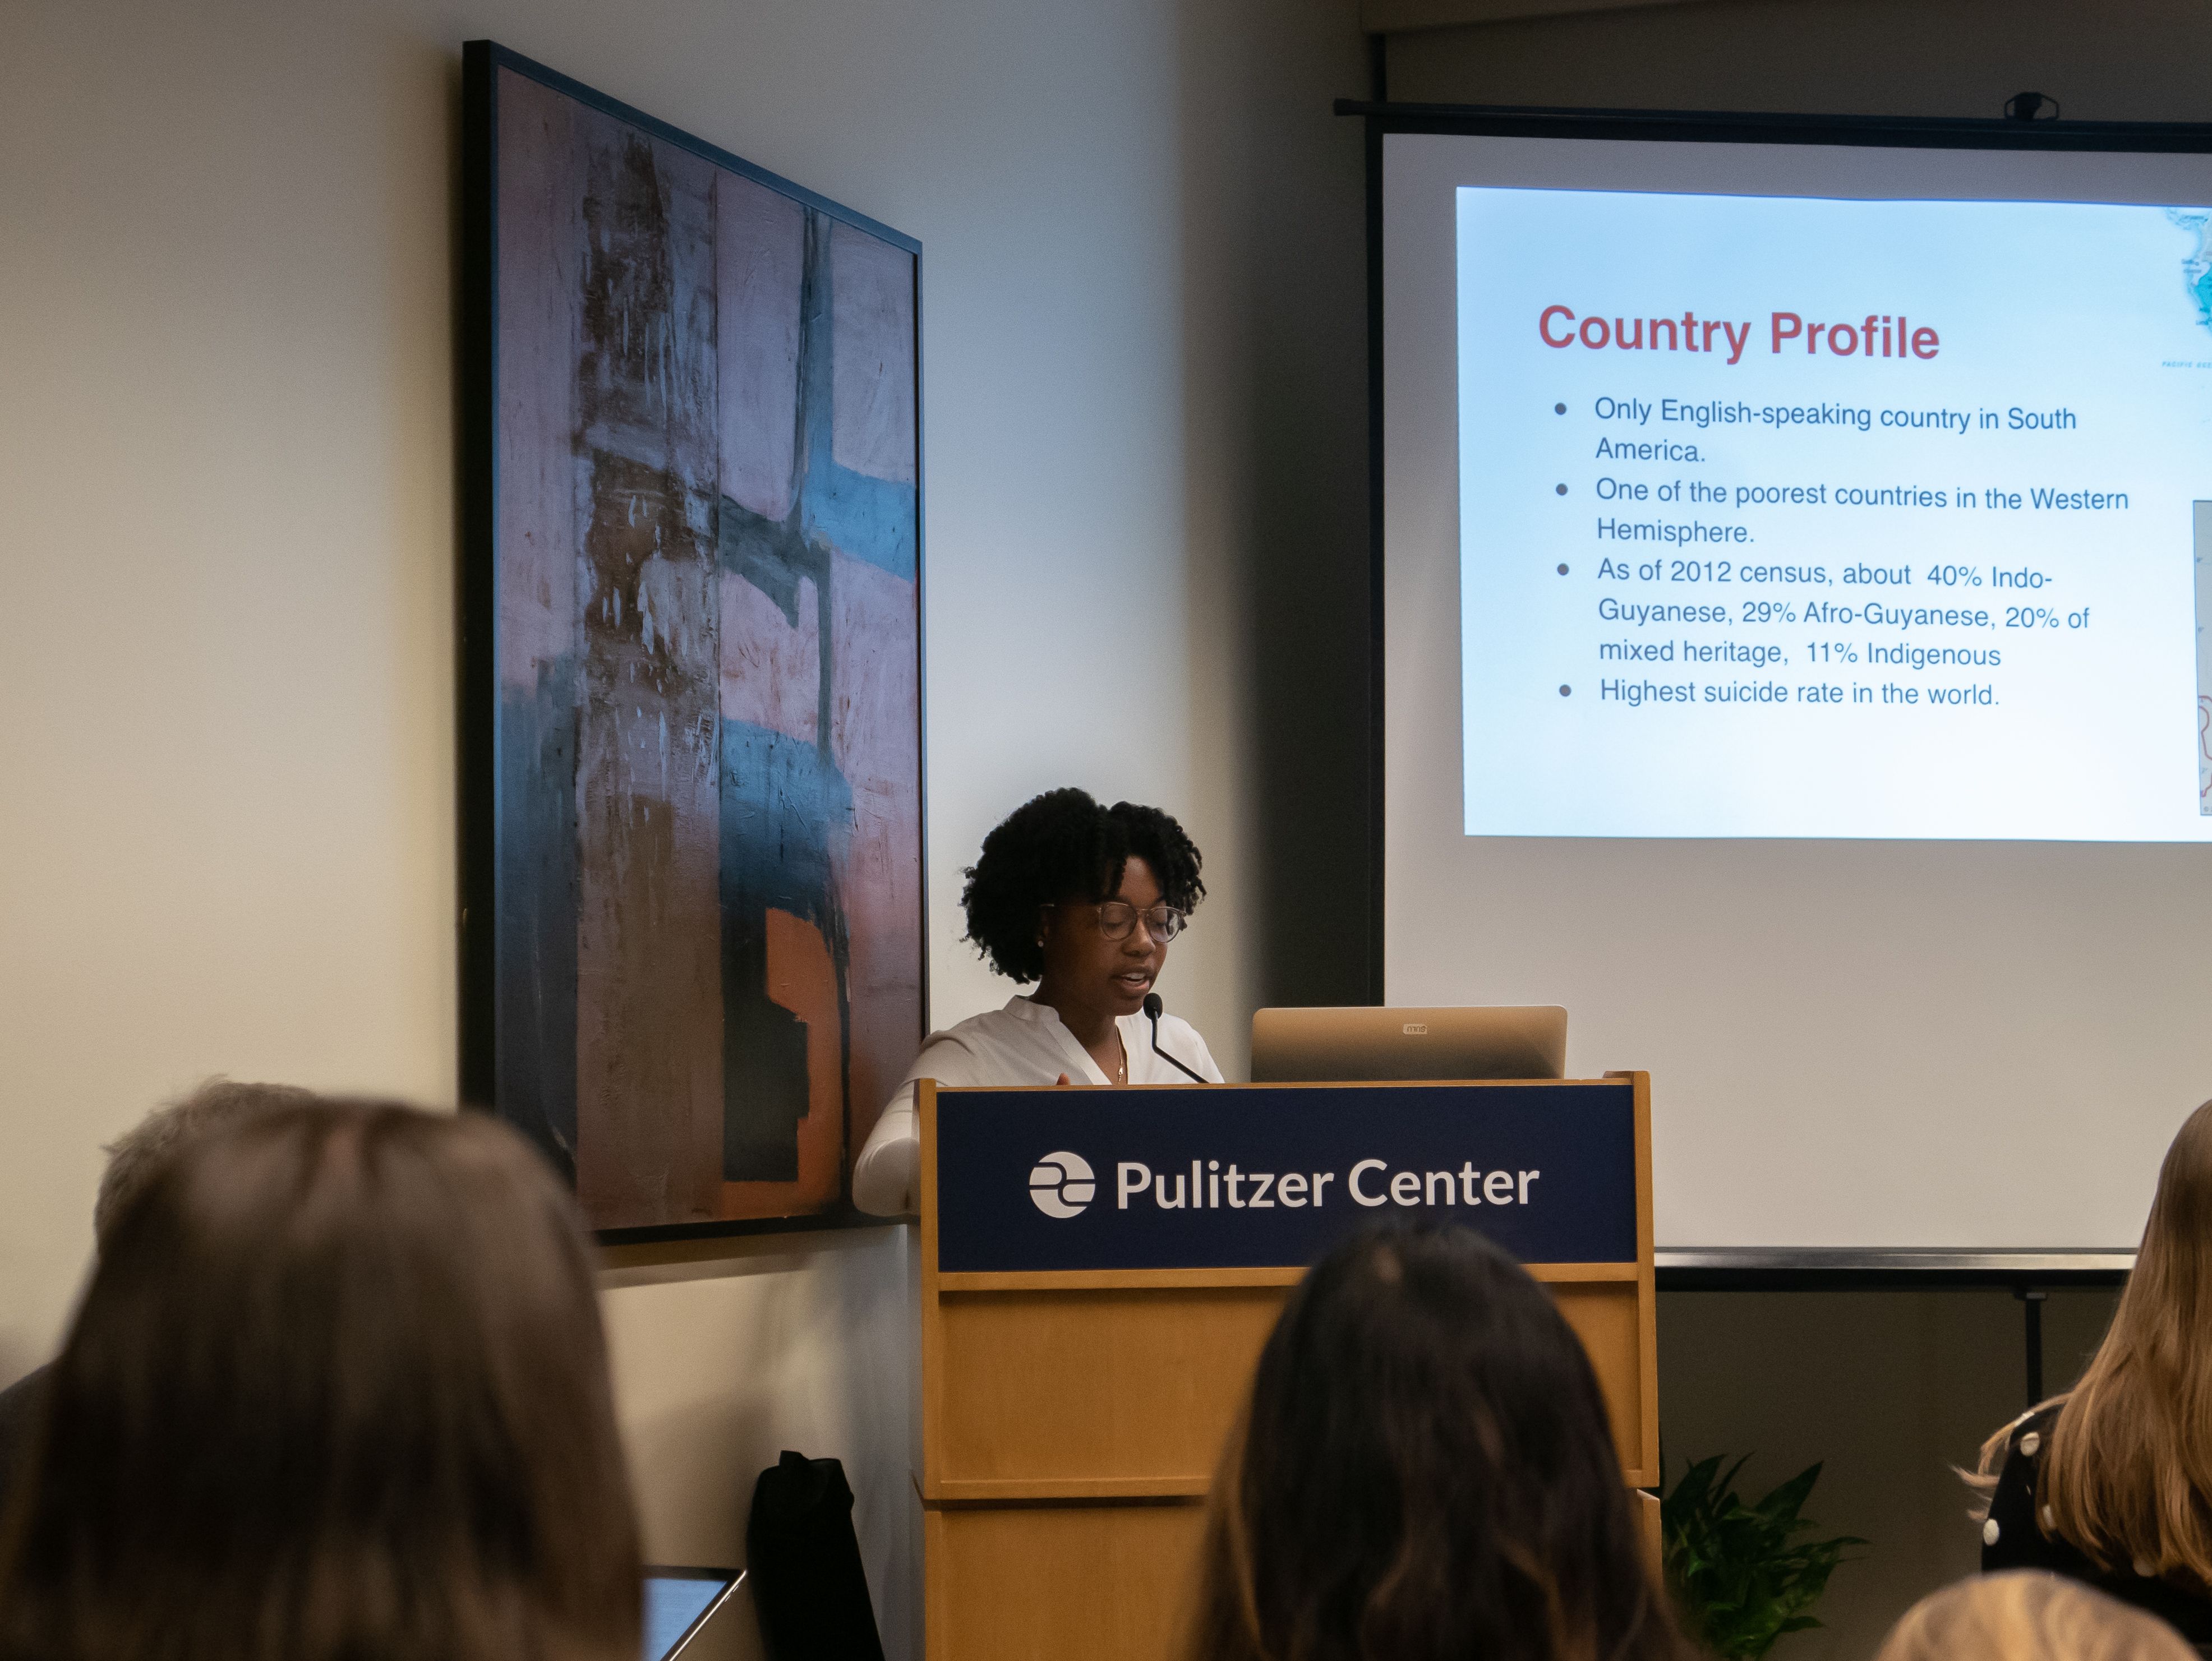 Daja Henry (Howard University) presents pre-reporting on her project "Gender-based Violence in Guyana" during the "Women's Health" panel on Day One of Washington Weekend. Henry will travel to Guyana this winter. Image by Meerabelle Jesuthasan. United States, 2019.
